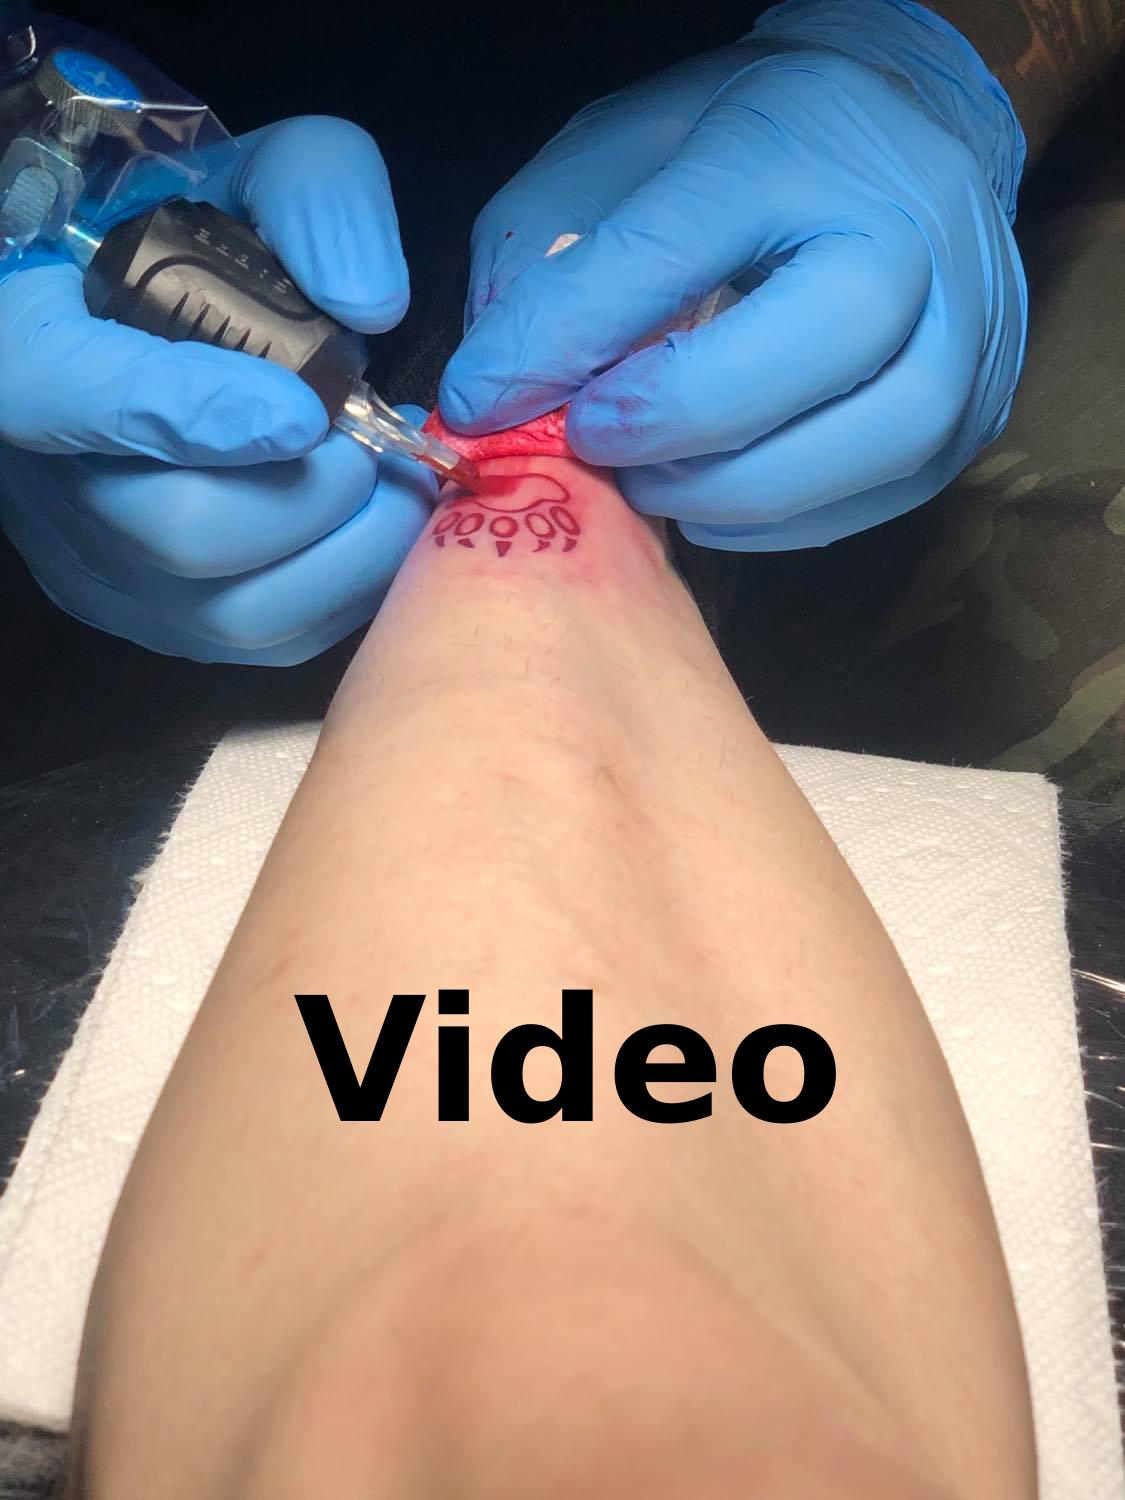 The tattoo beginning to be filled in, with the word 'Video' beneath.